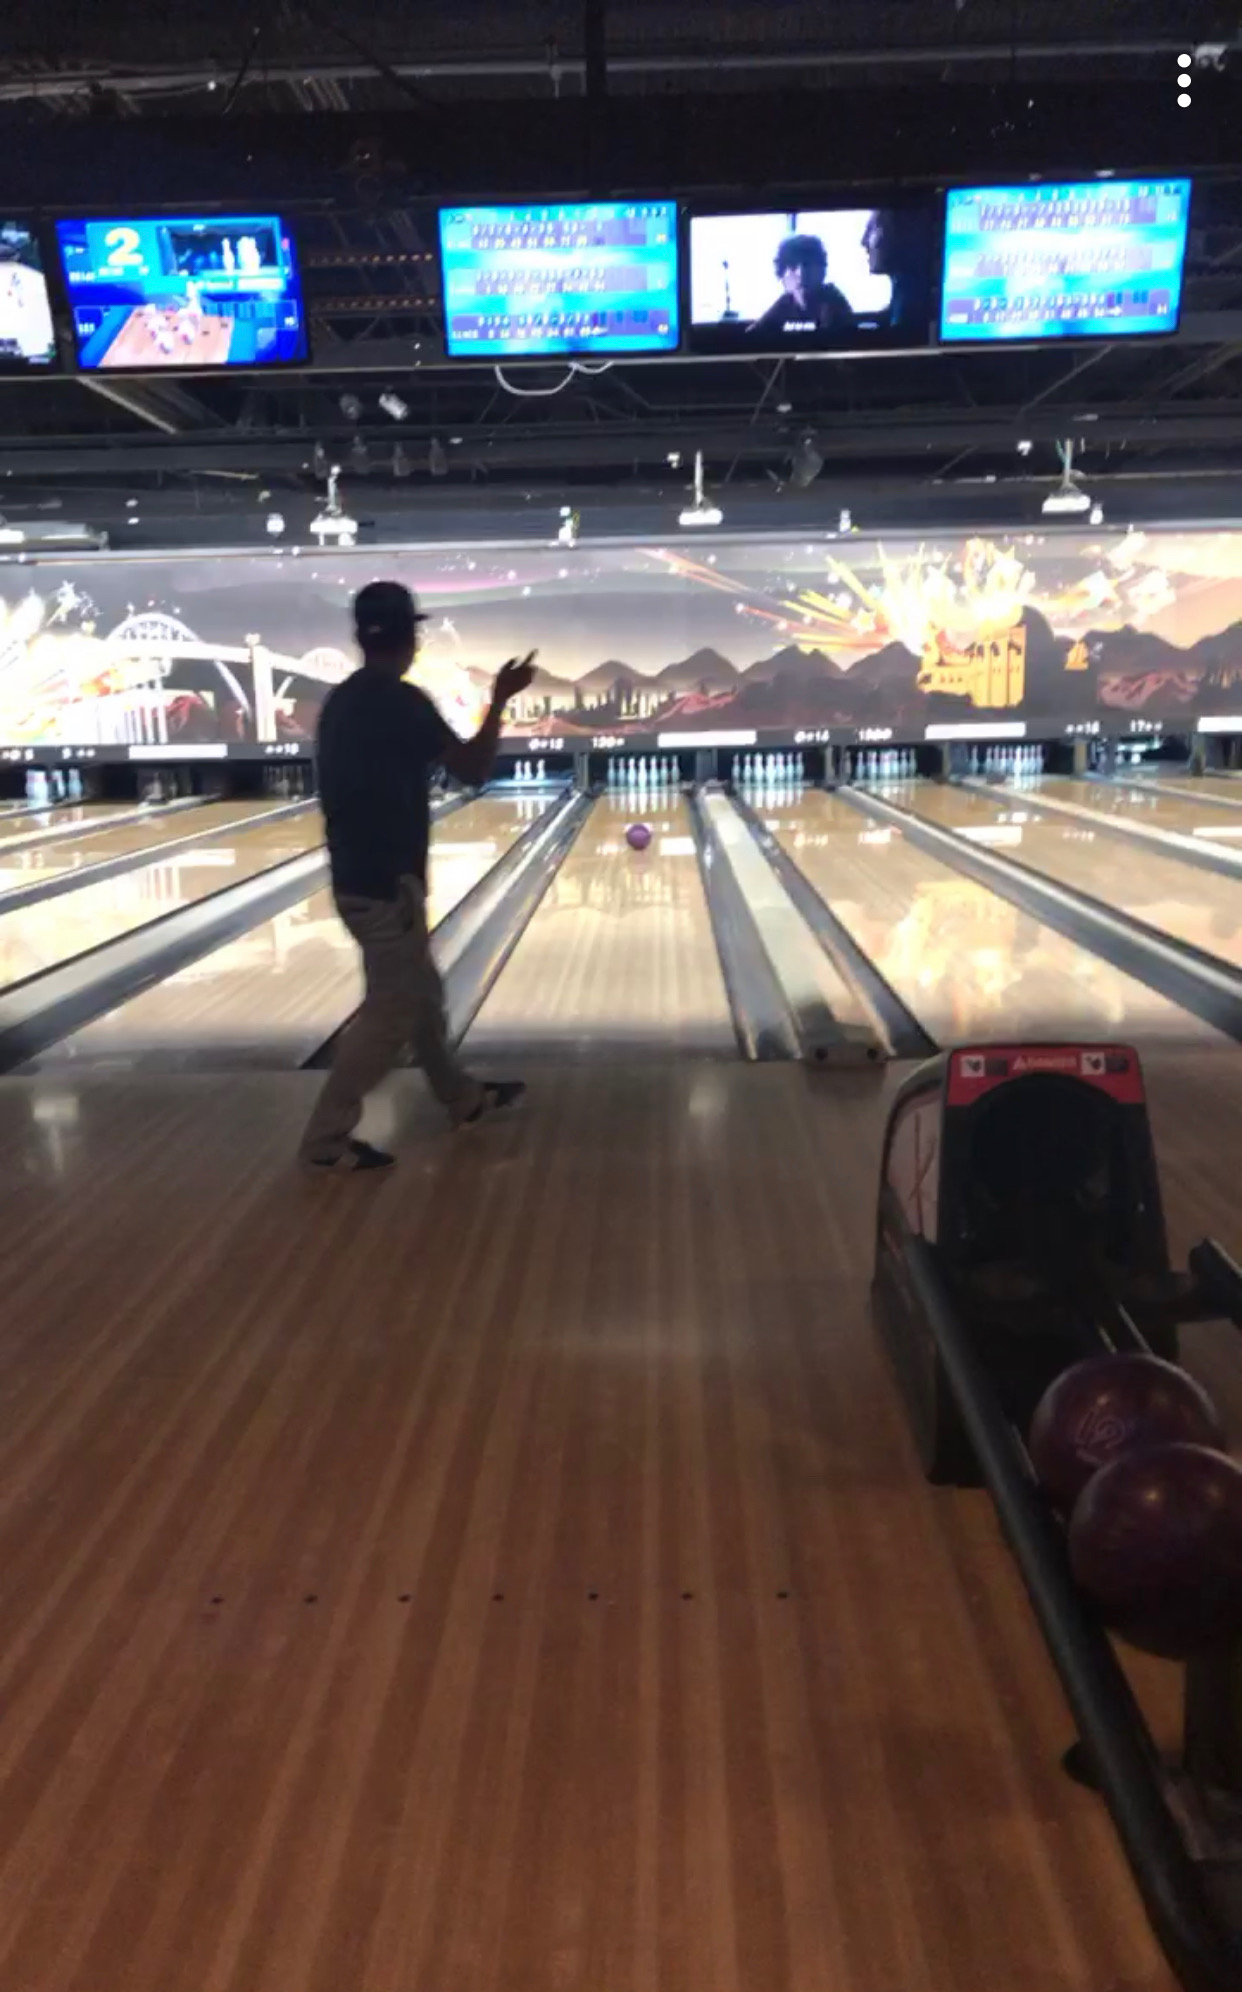 Elmer wins both bowling rounds. 